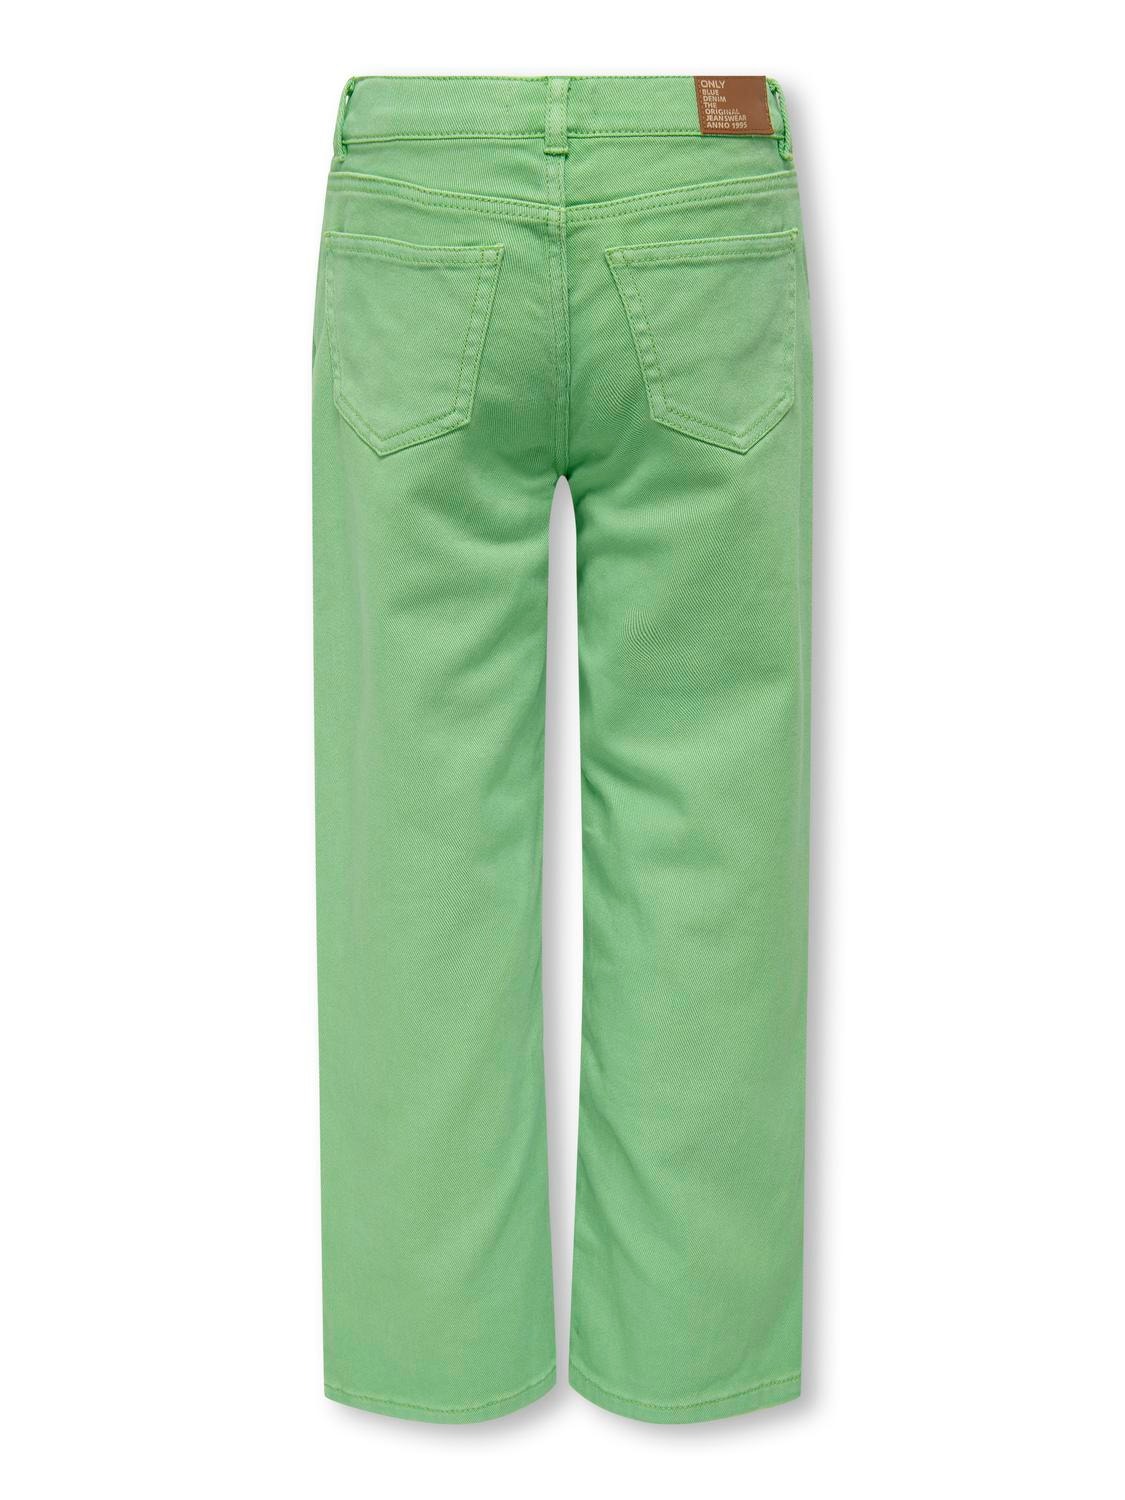 ONLY Straight Fit Normal midje Bukser -Summer Green - 15273900